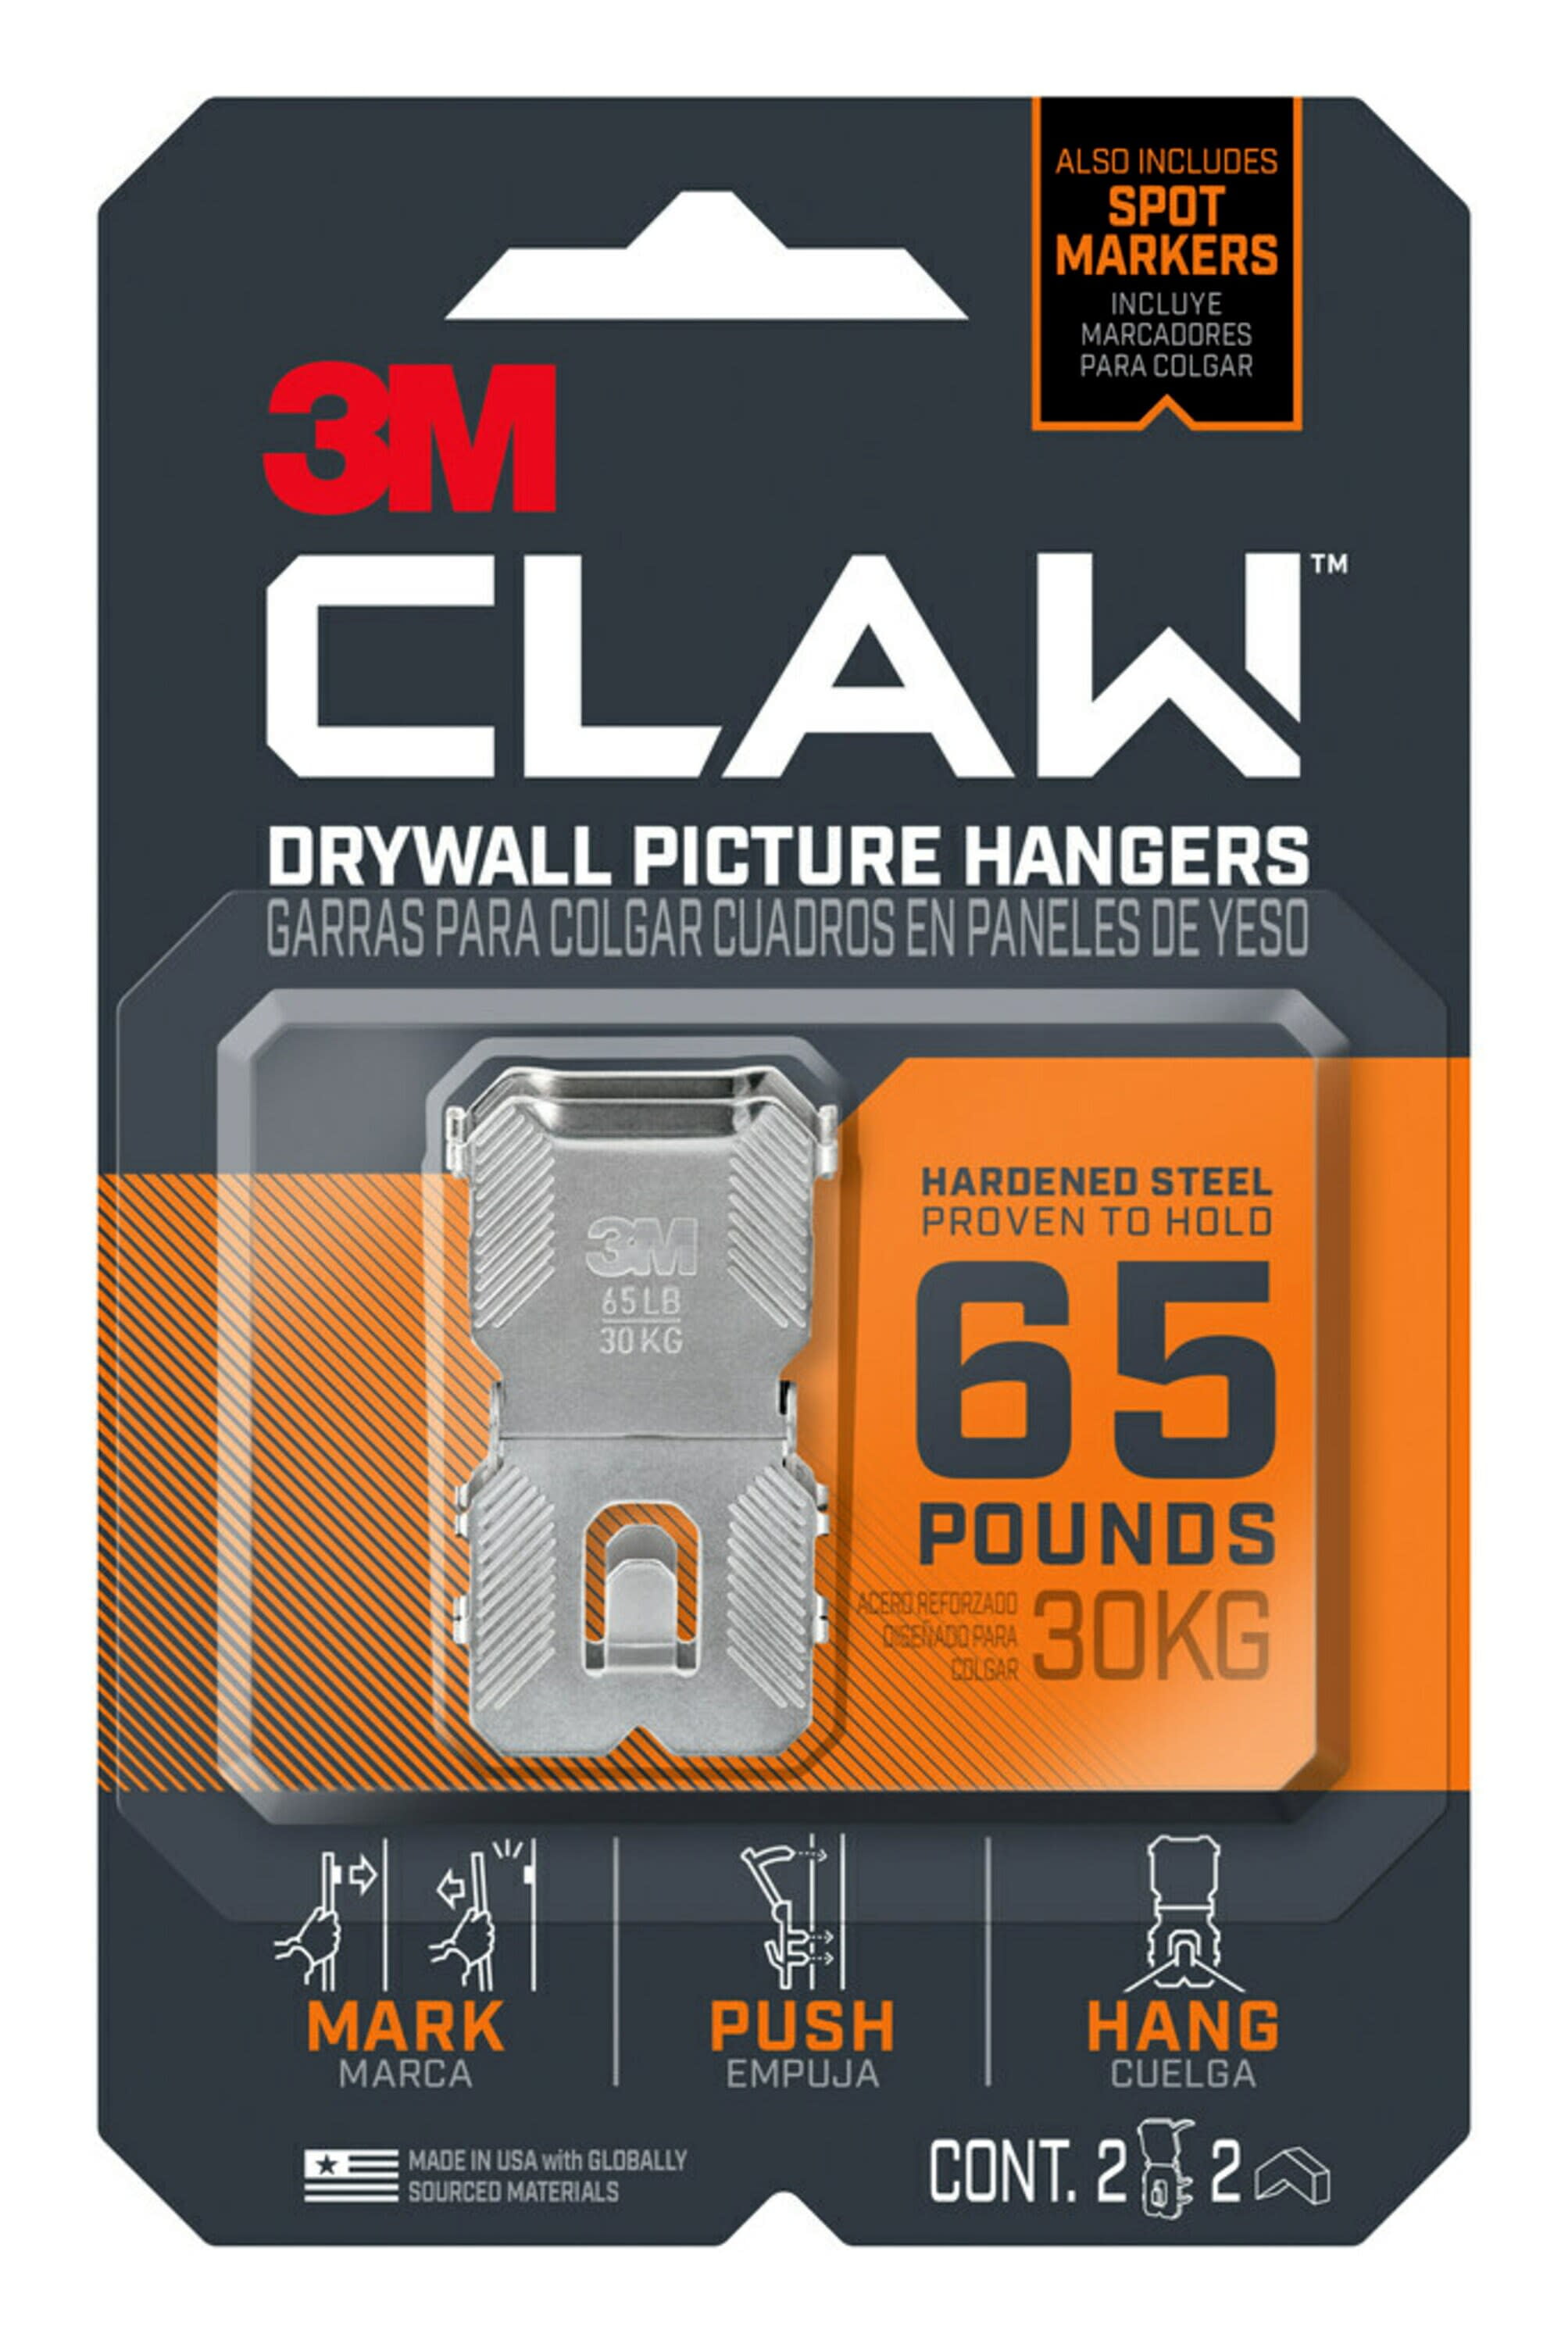 3M CLAW Drywall Picture Hanger with Temporary Spot Marker, Holds 65 lbs, 2 Hangers, 2 Markers